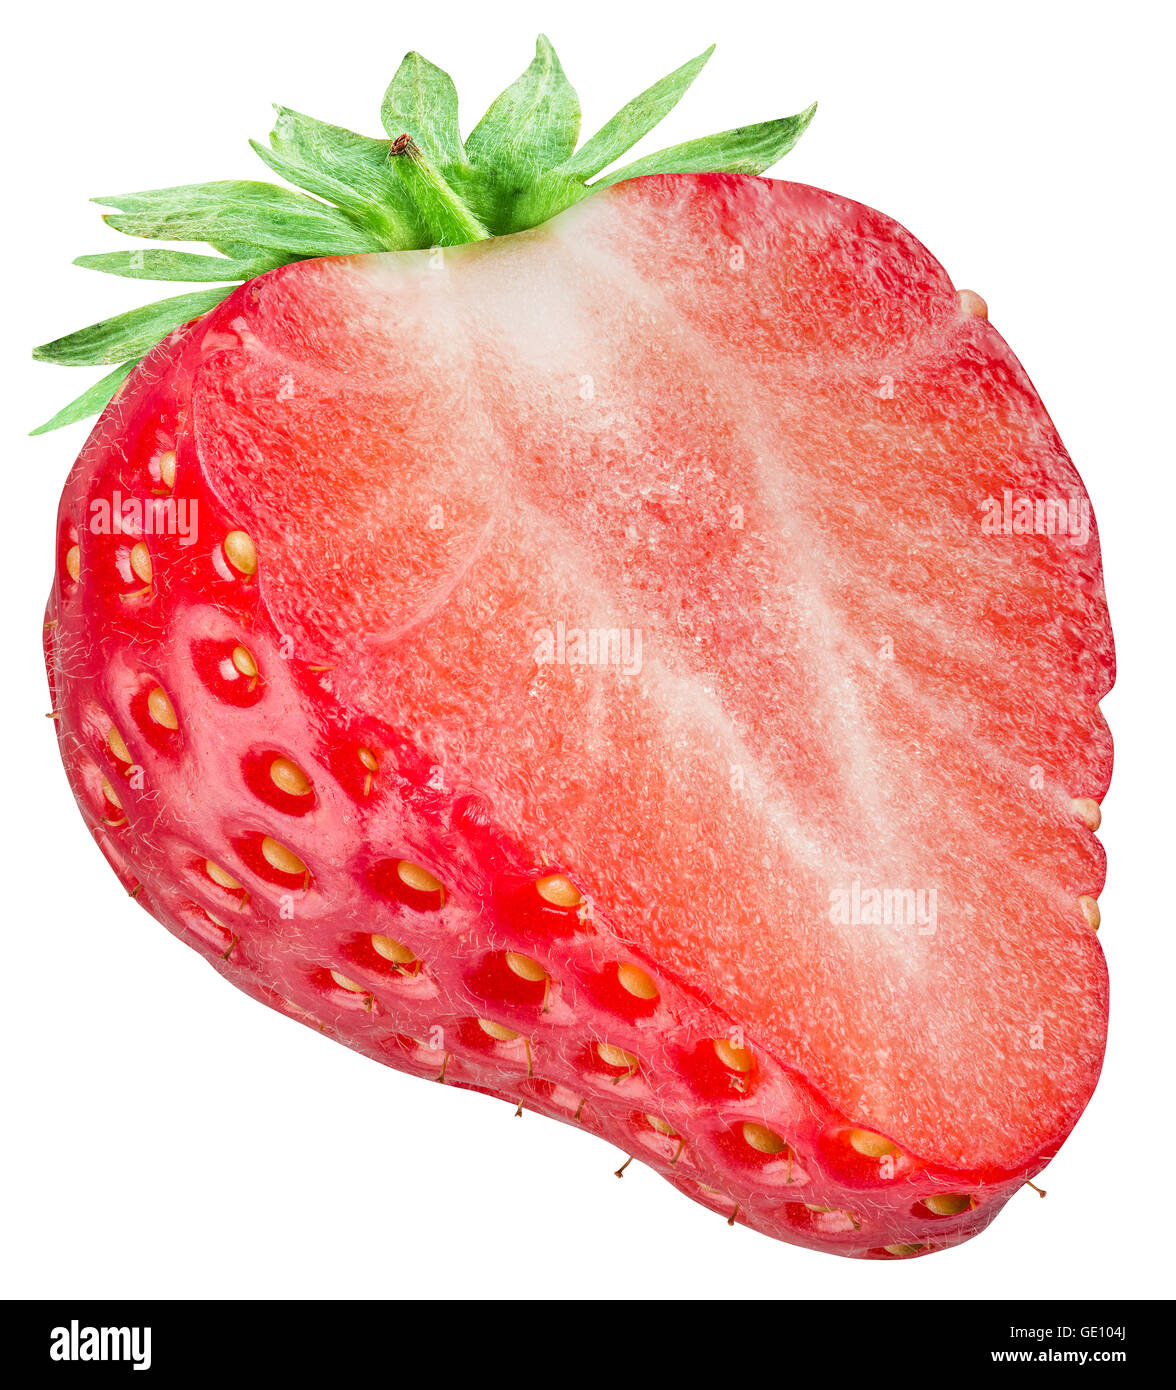 One half of strawberry on the white background.File contains clipping paths. Stock Photo